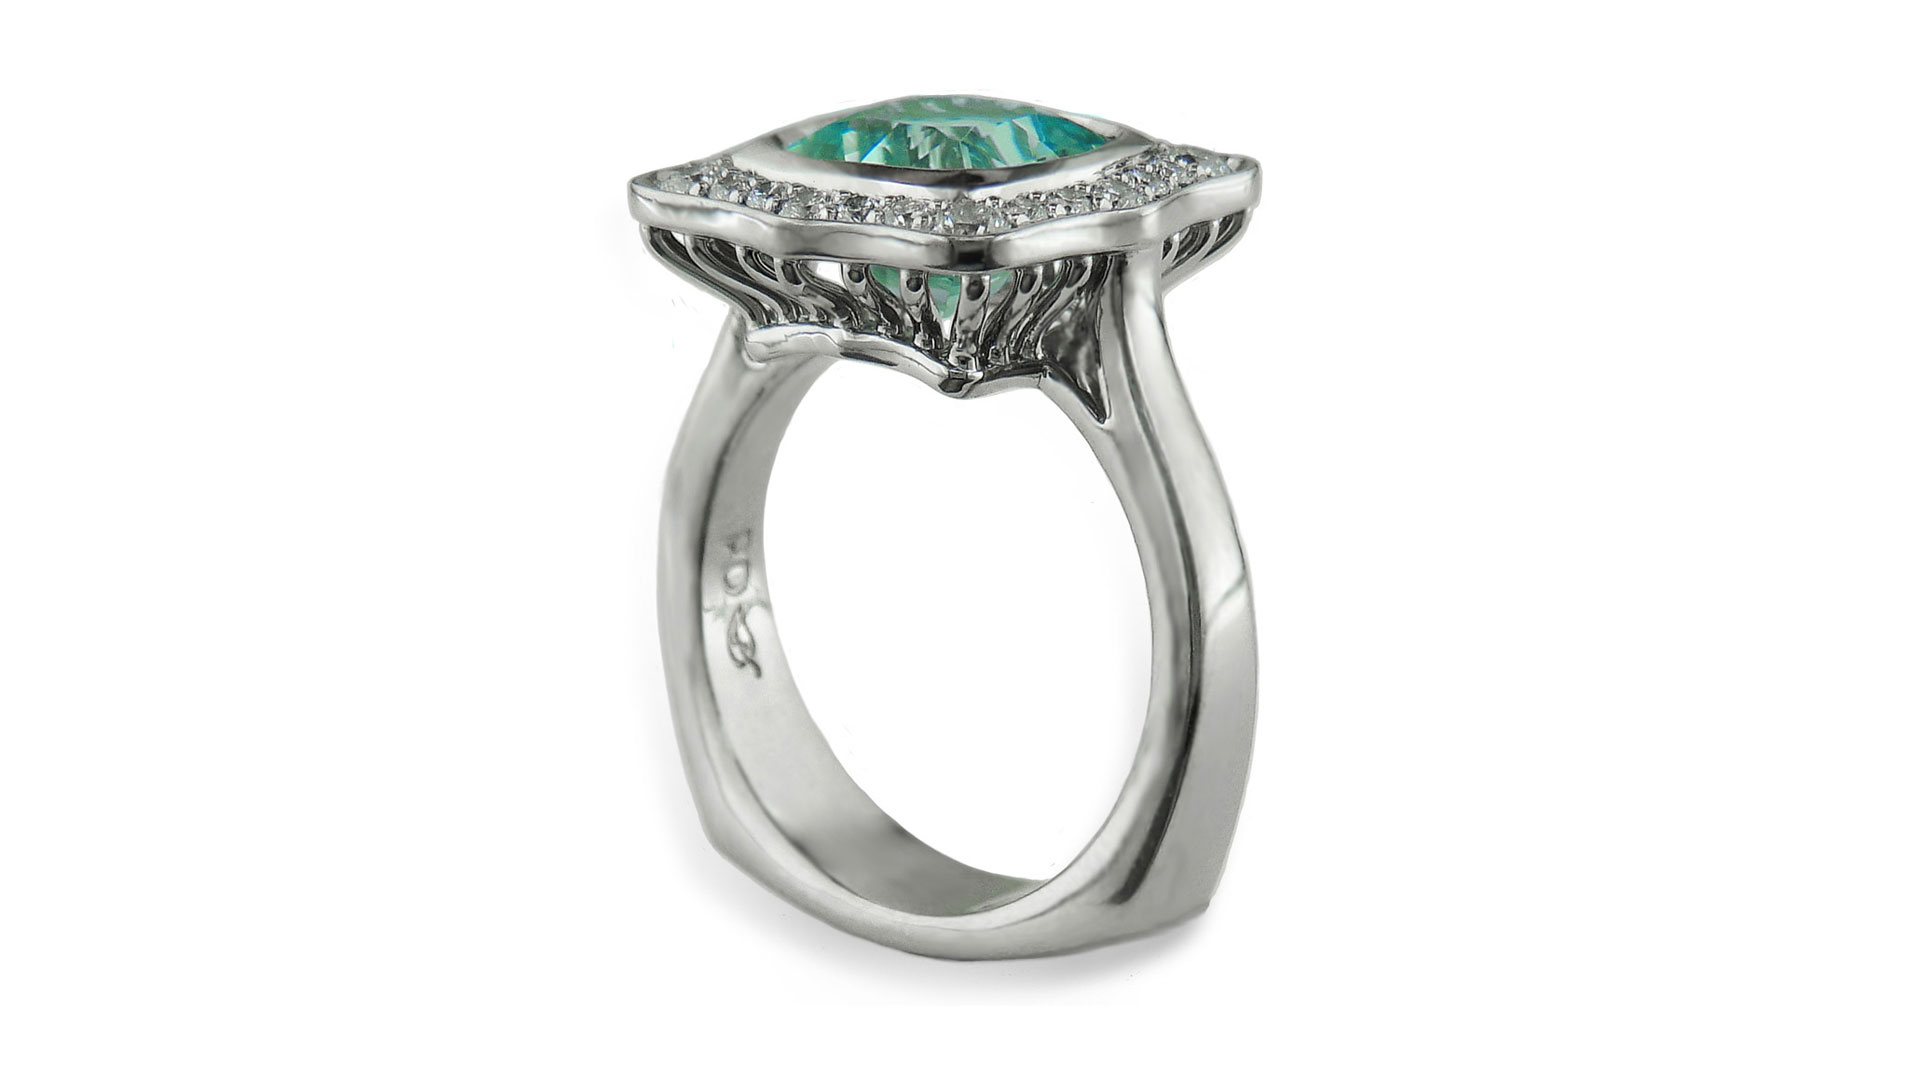 Blue Martini ring by Jeremy Dunn